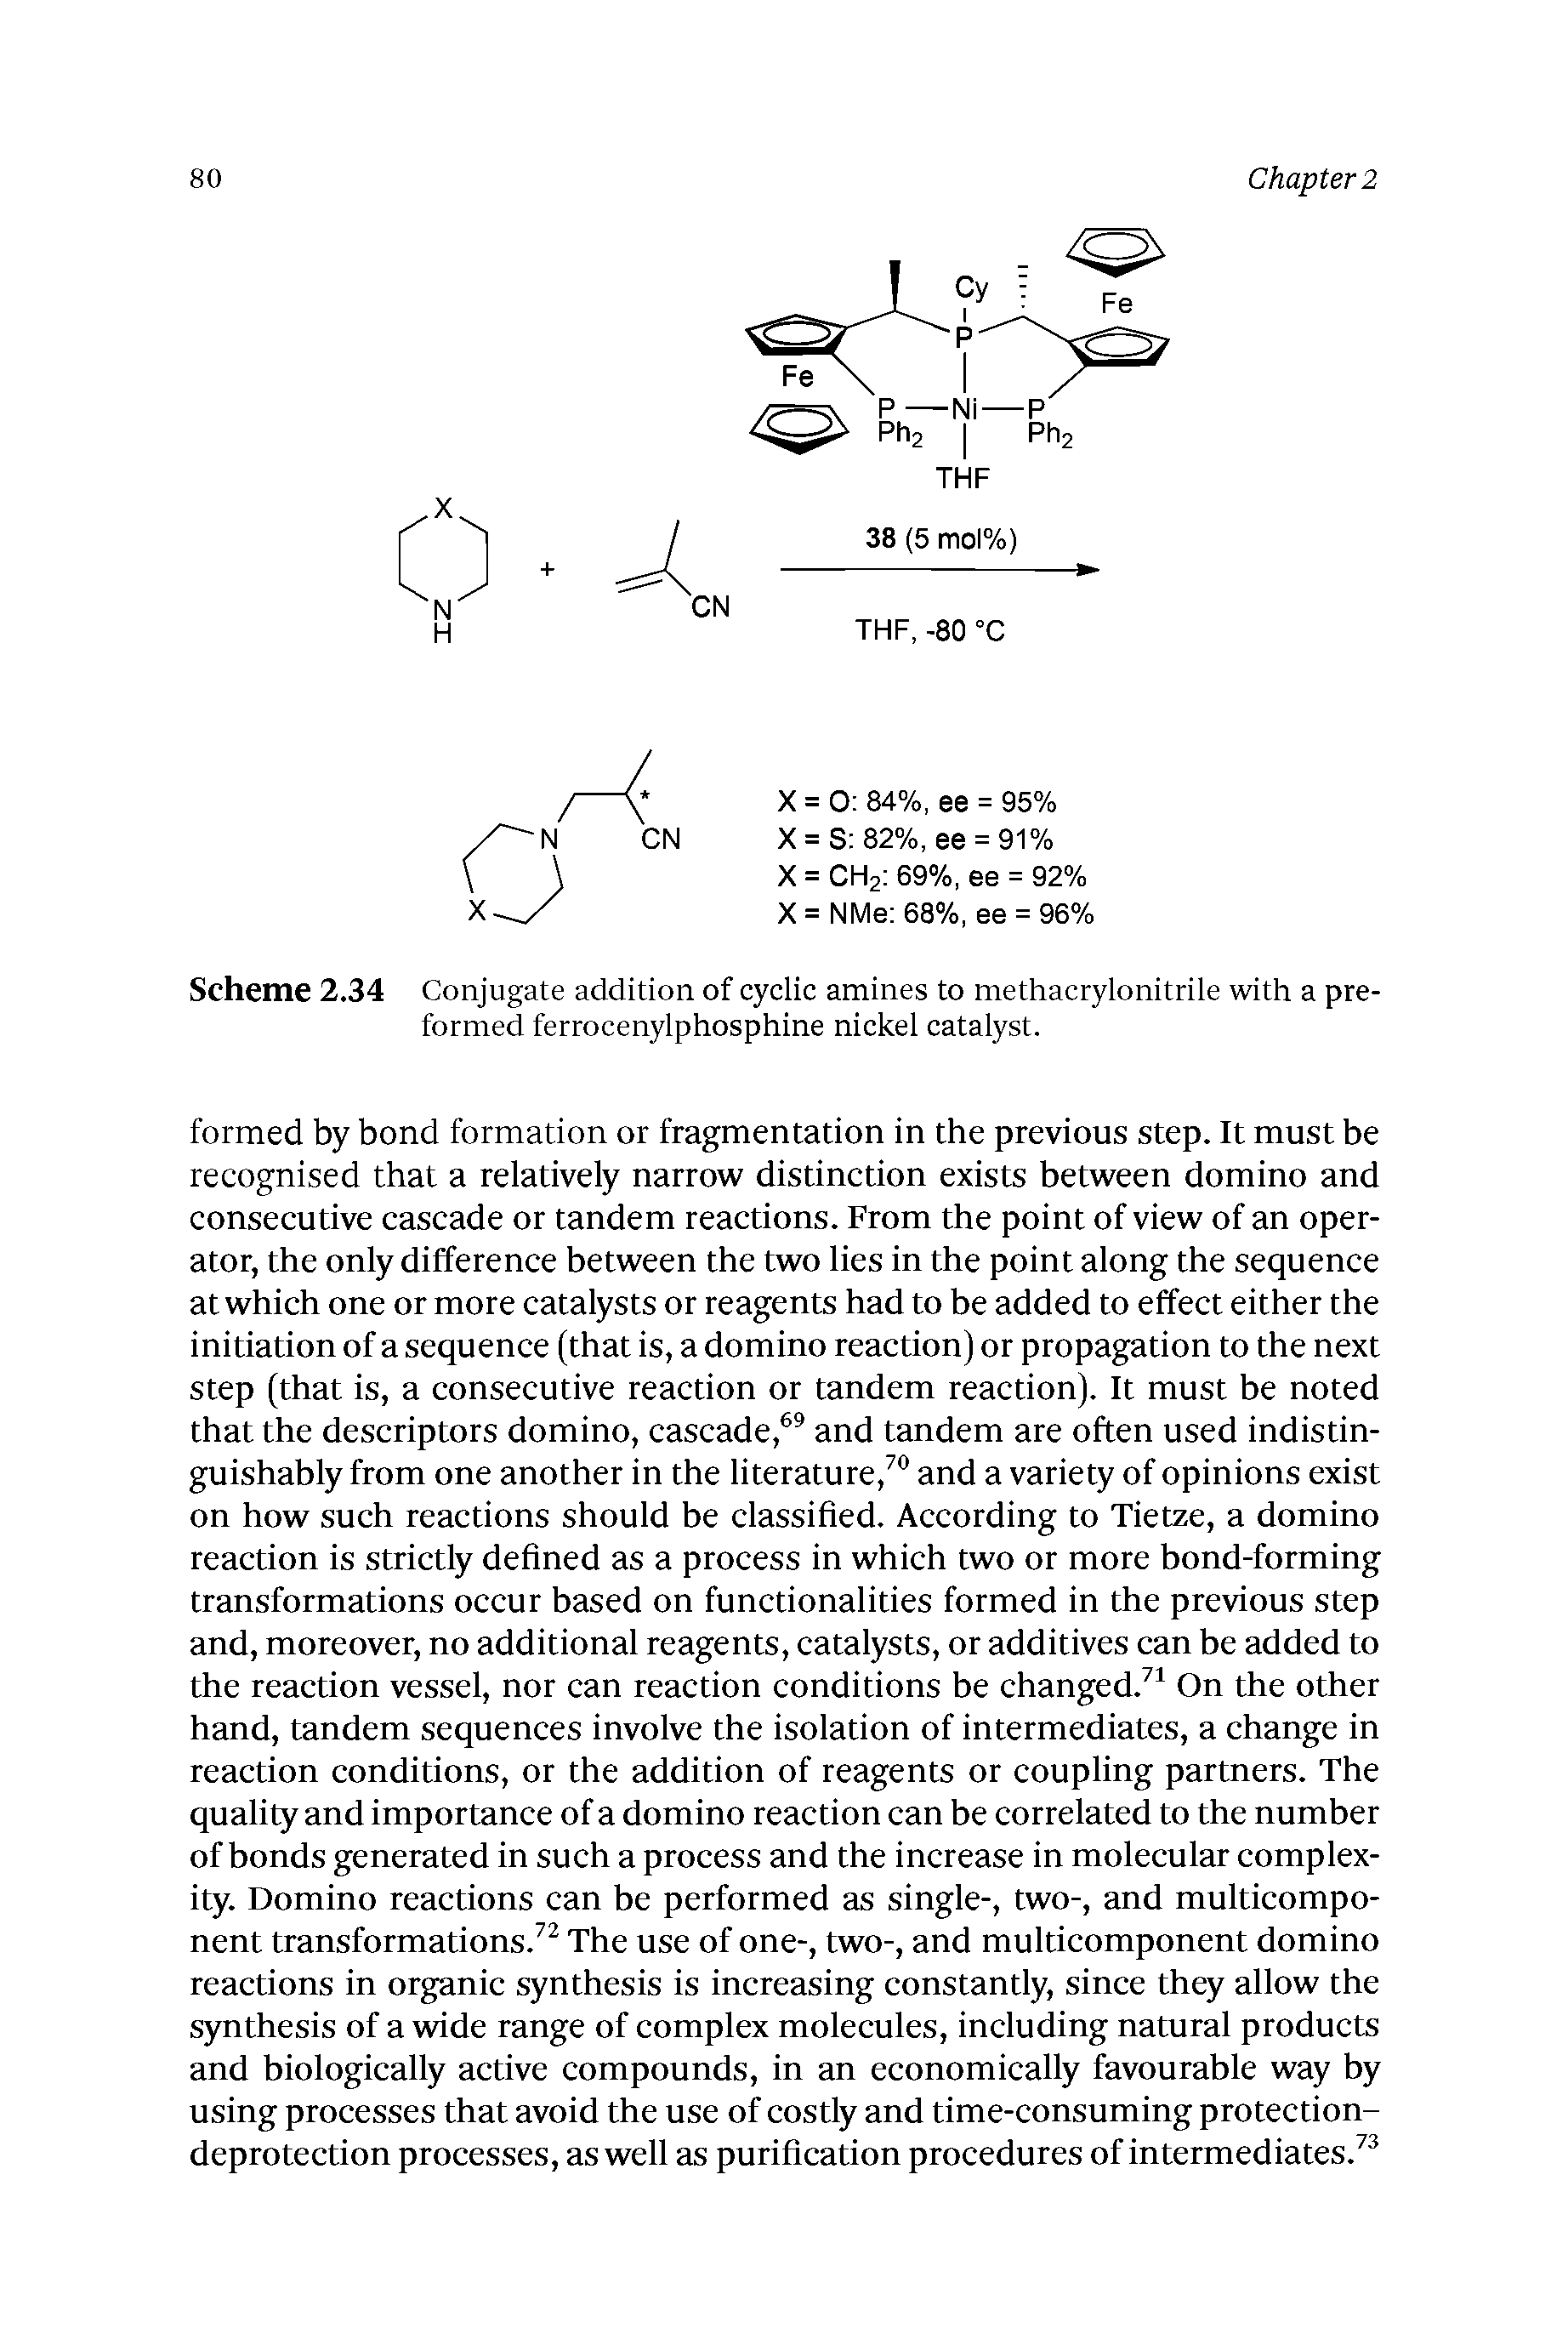 Scheme 2.34 Conjugate addition of cyclic amines to methacrylonitrile with a preformed ferrocenylphosphine nickel catalyst.